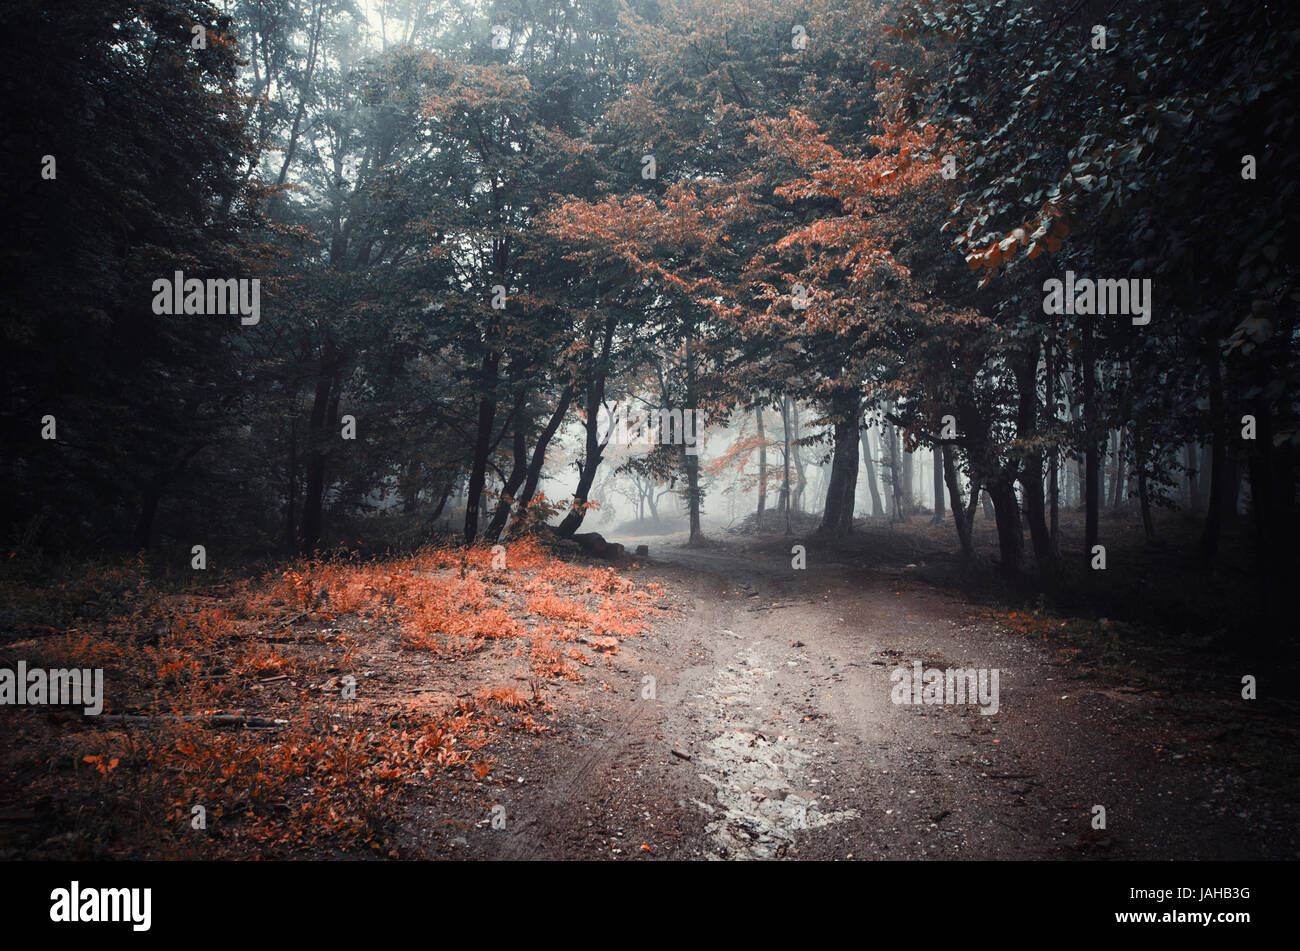 Surreal autumn forest landscape. Road through misty forest fantasy scenery Stock Photo